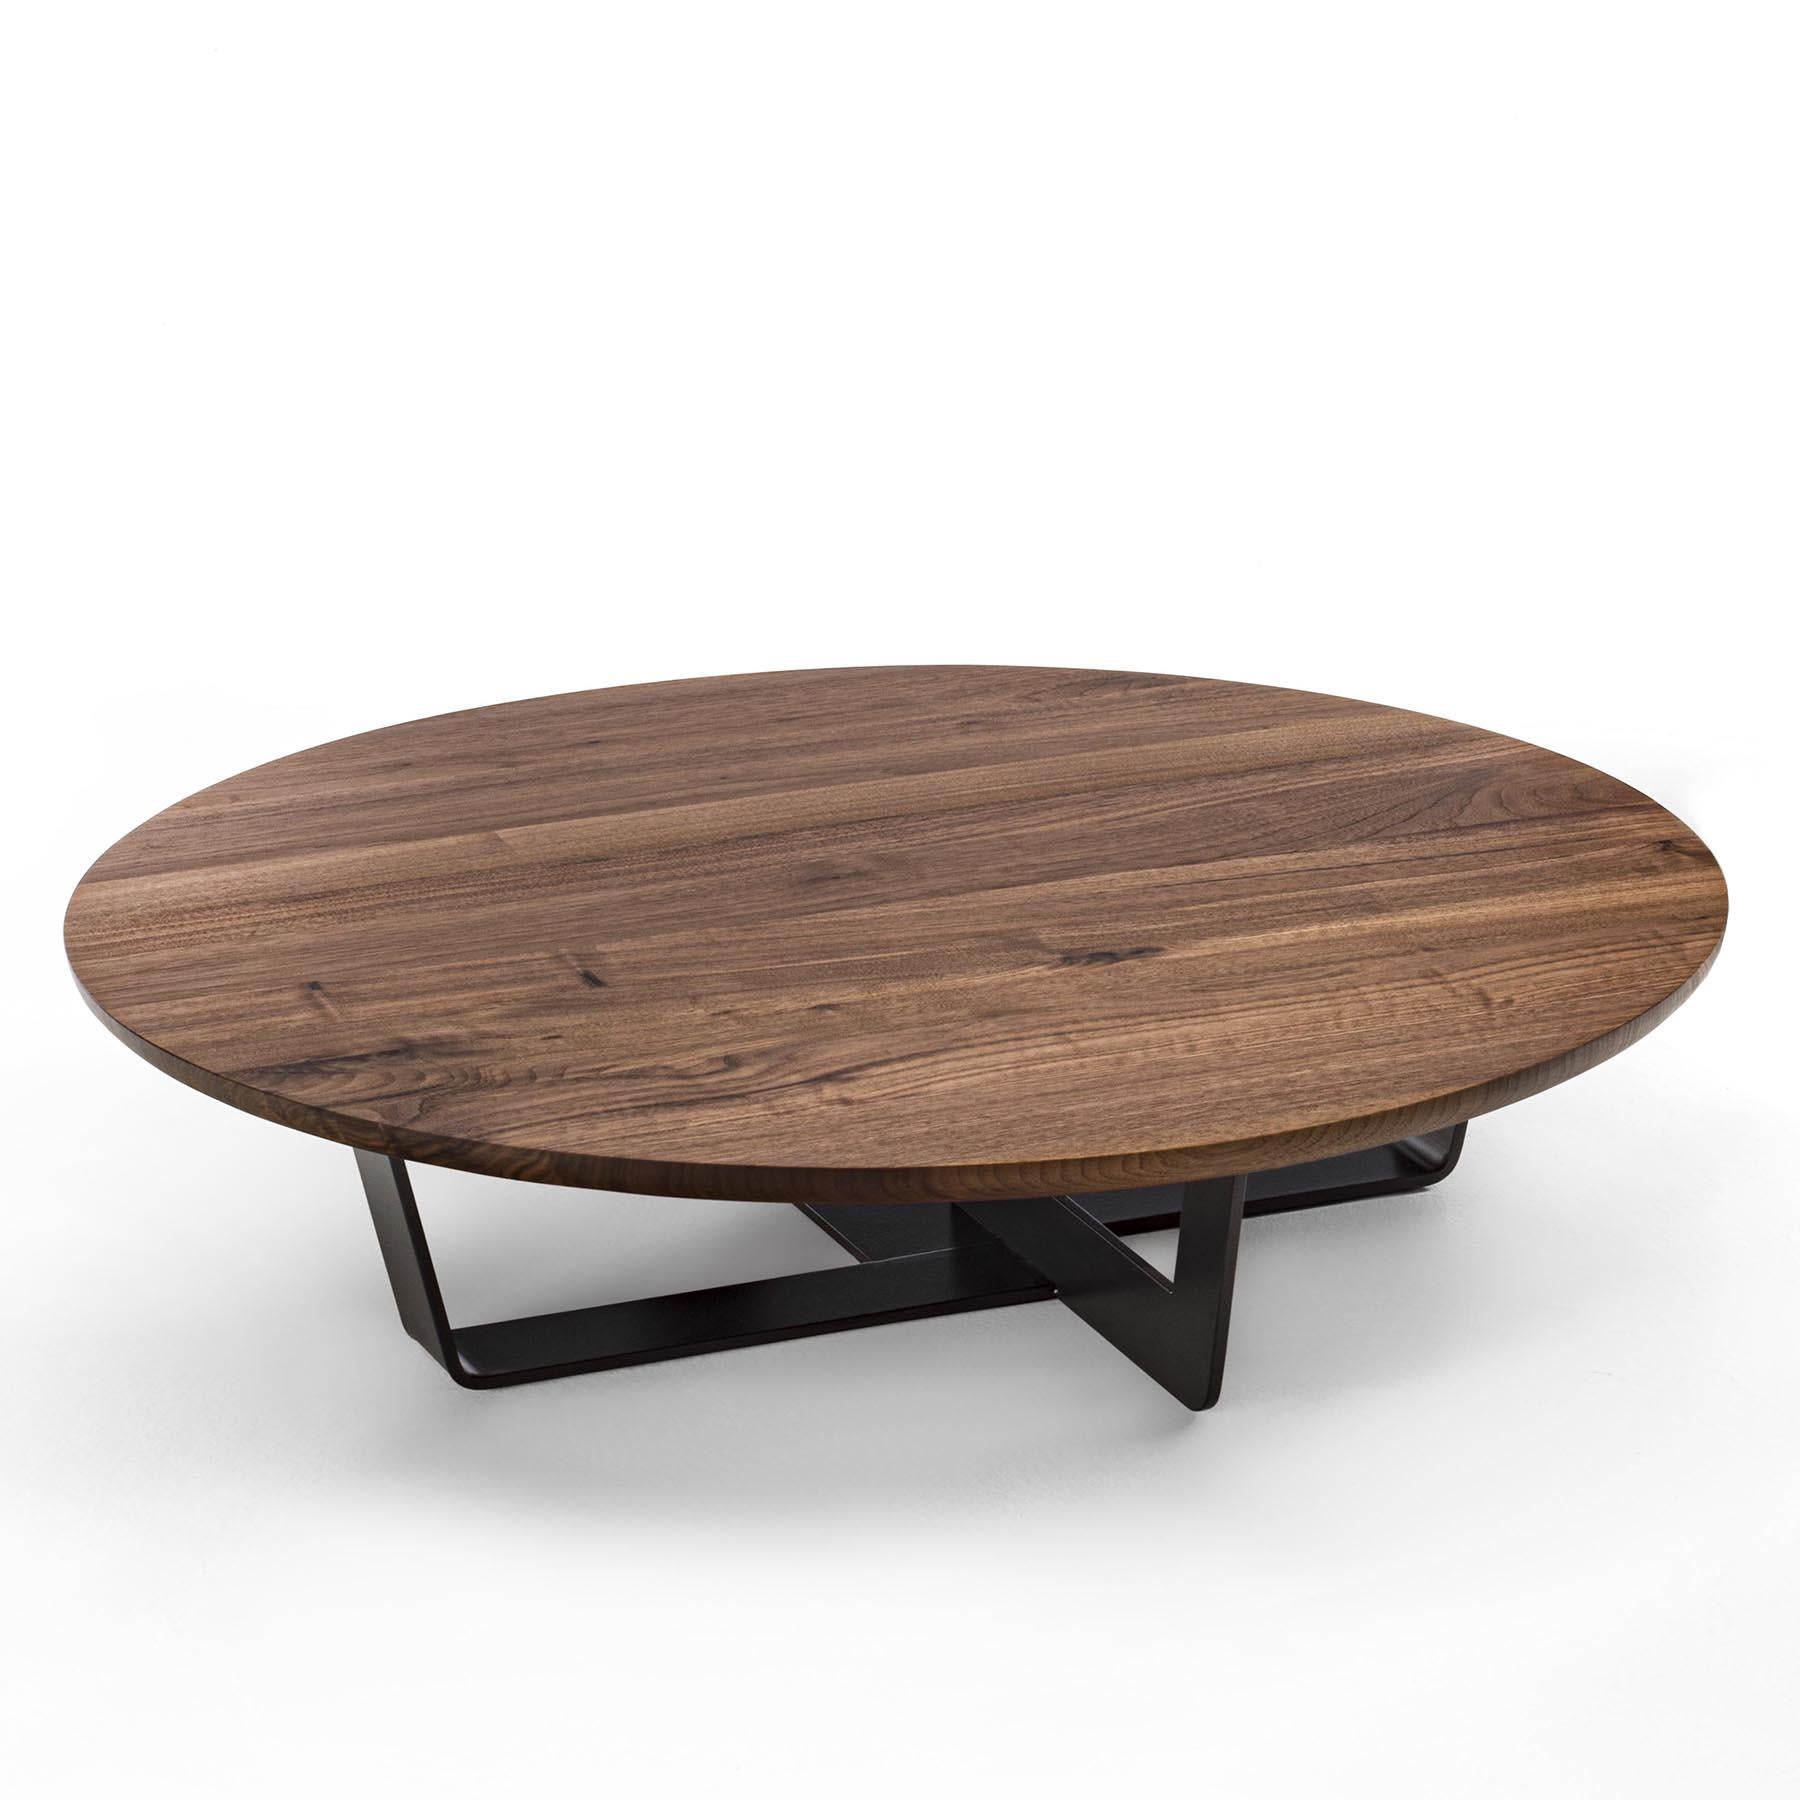 Coffee table Jay Walnut with base structure in 
lacquered iron in irondust finish. With solid walnut top
without knots.
Also available with solid cherry or oak or maple or elm
wood top.
 